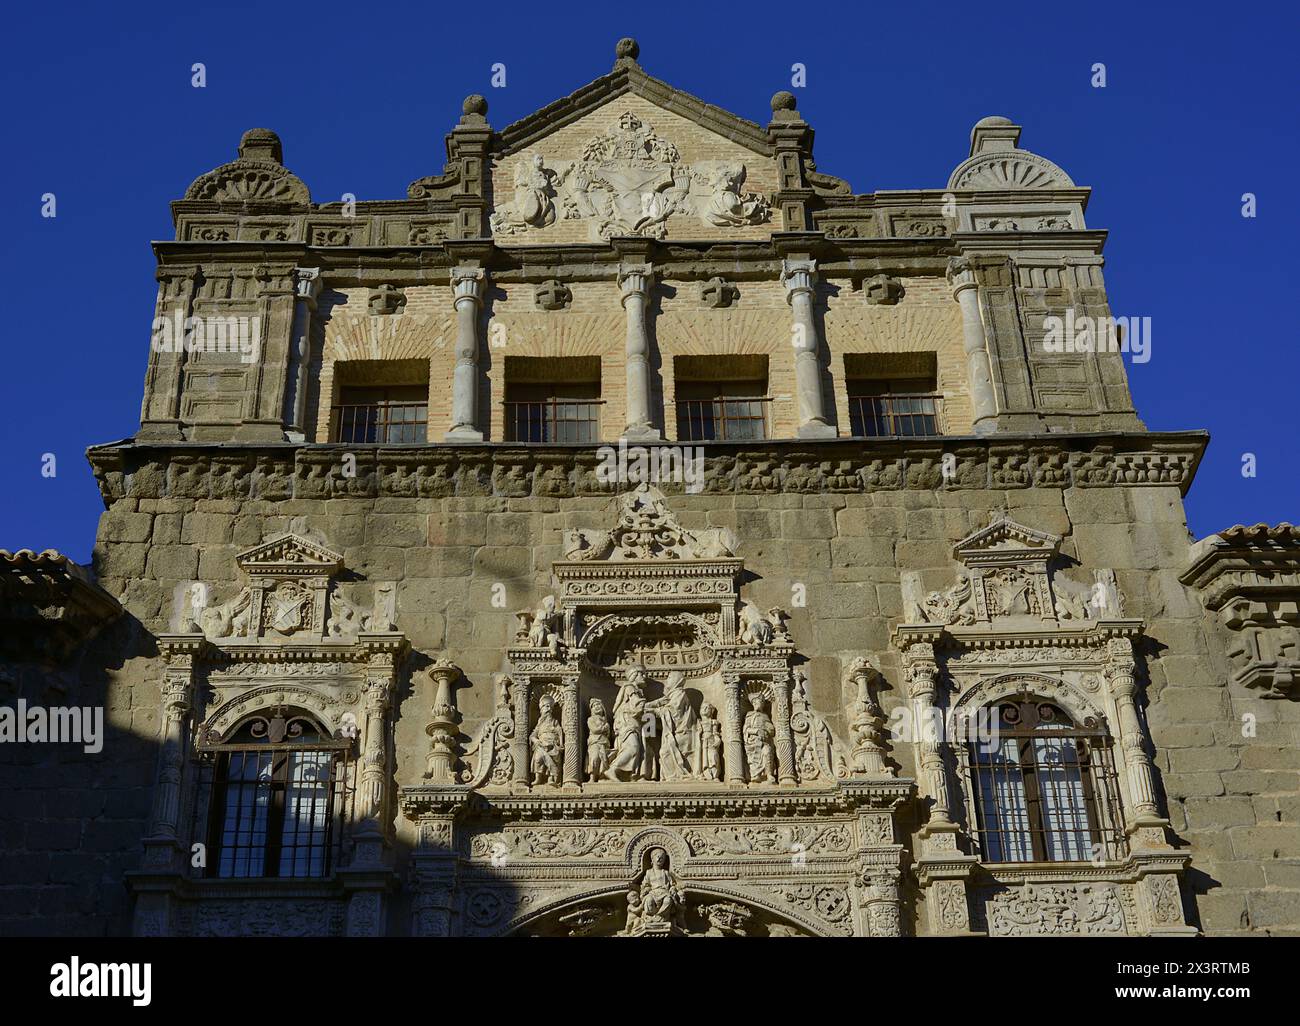 Toledo, Castile-La Mancha, Spain. Hospital de Santa Cruz. Founded by Cardinal Mendoza (1428-1495) at the end of the 15th century. View of the upper part of the façade of the building, constructed in the Plateresque style in the 1520s, by Alonso de Covarrubias (1488-1570). The building houses the Museum of Santa Cruz. Author: Alonso de Covarrubias (1488-1570). Spanish architect. Stock Photo